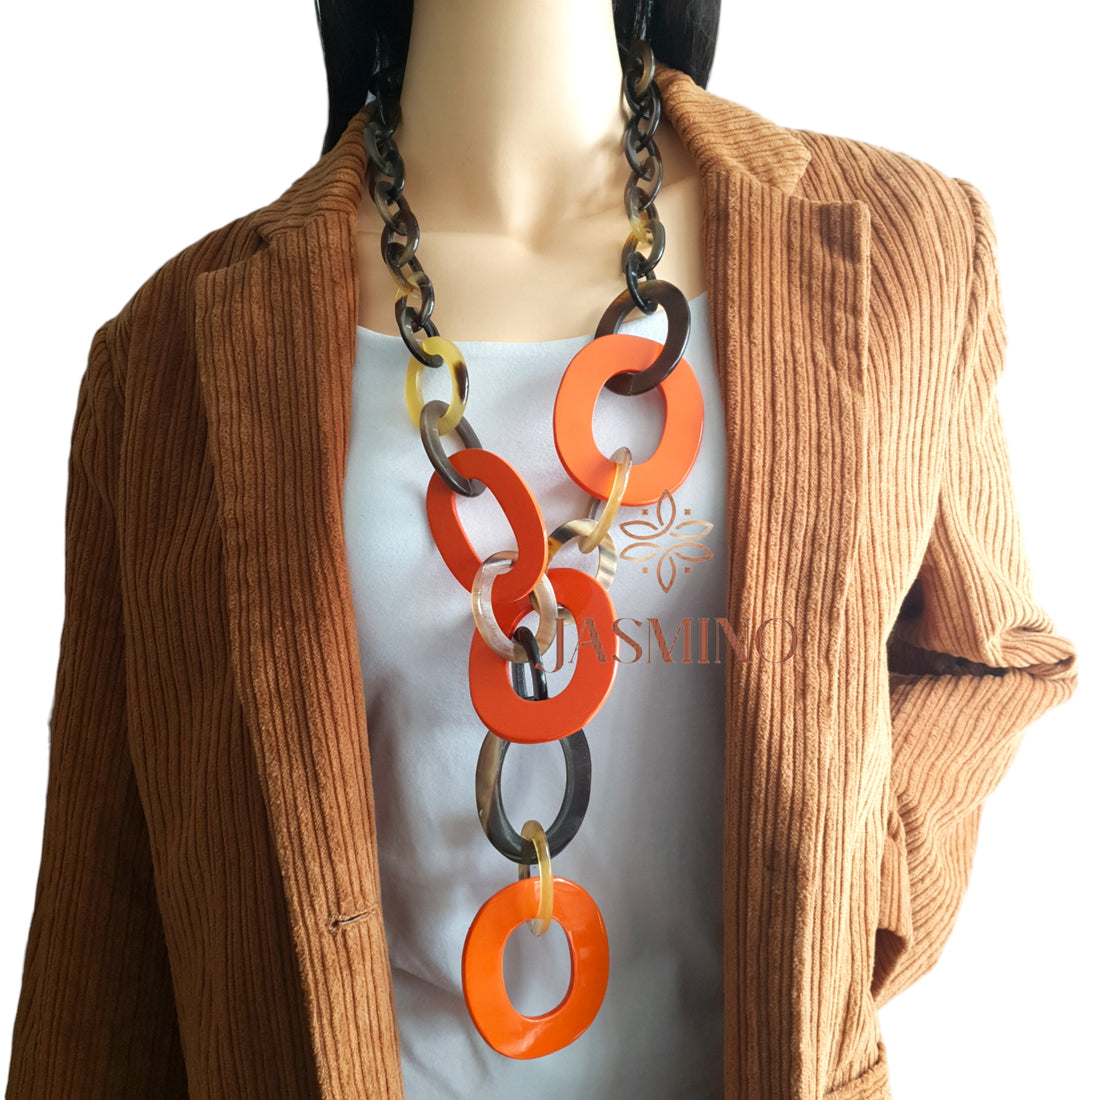 Jasmino Unique Meaningful Gift Collection For Her Orange Chain Necklace Made By Natural Buffalo Horn